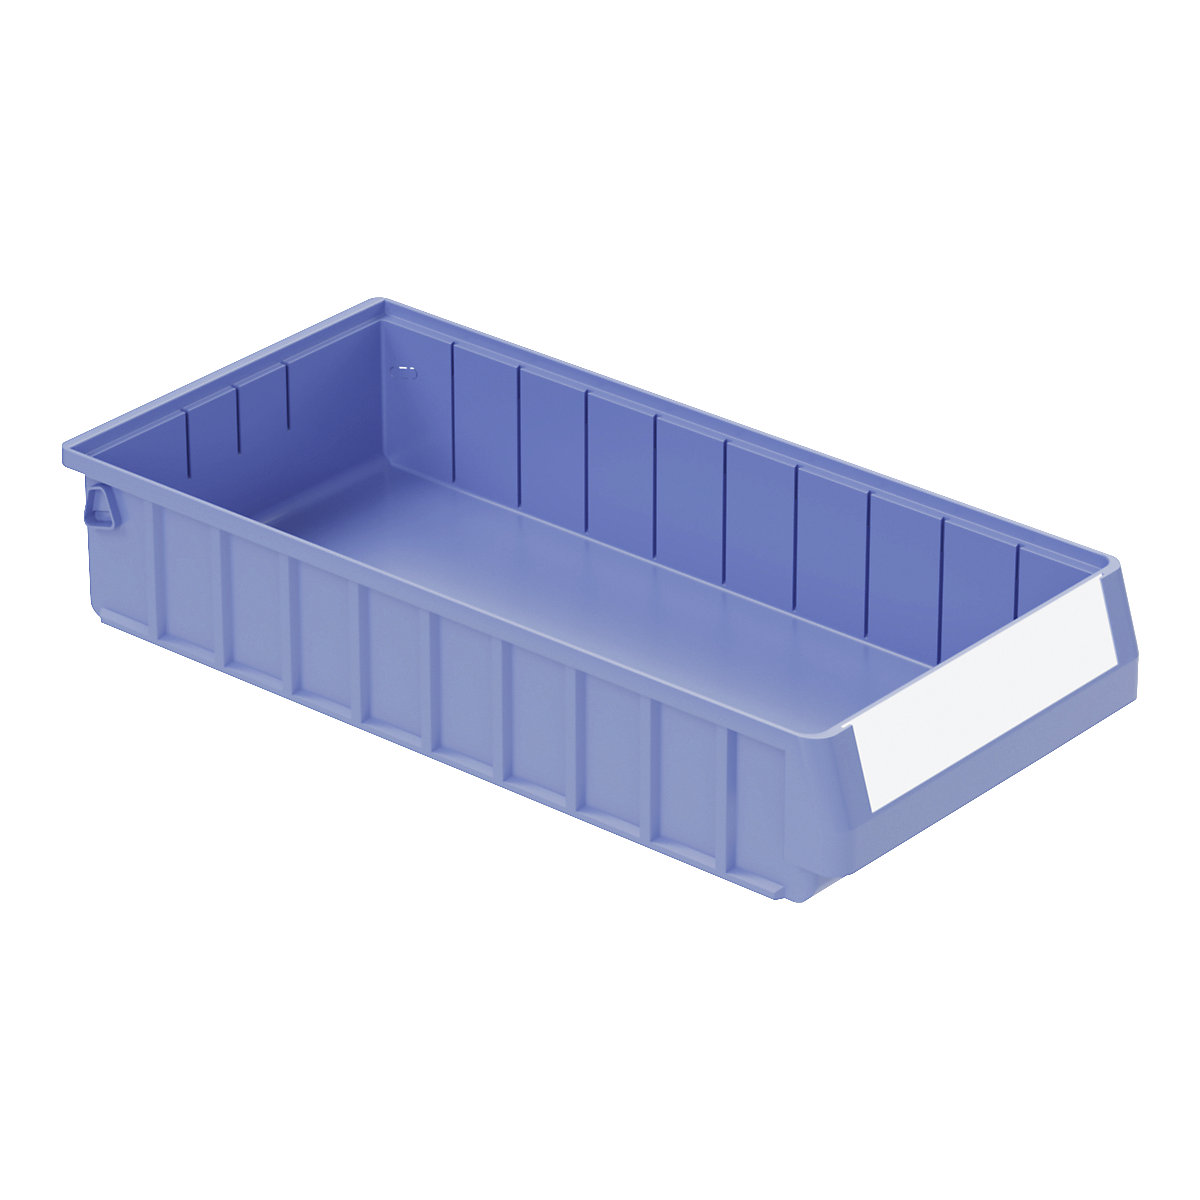 Shelf bin – BITO, made of PP, LxWxH 500 x 234 x 90 mm, pack of 8-4